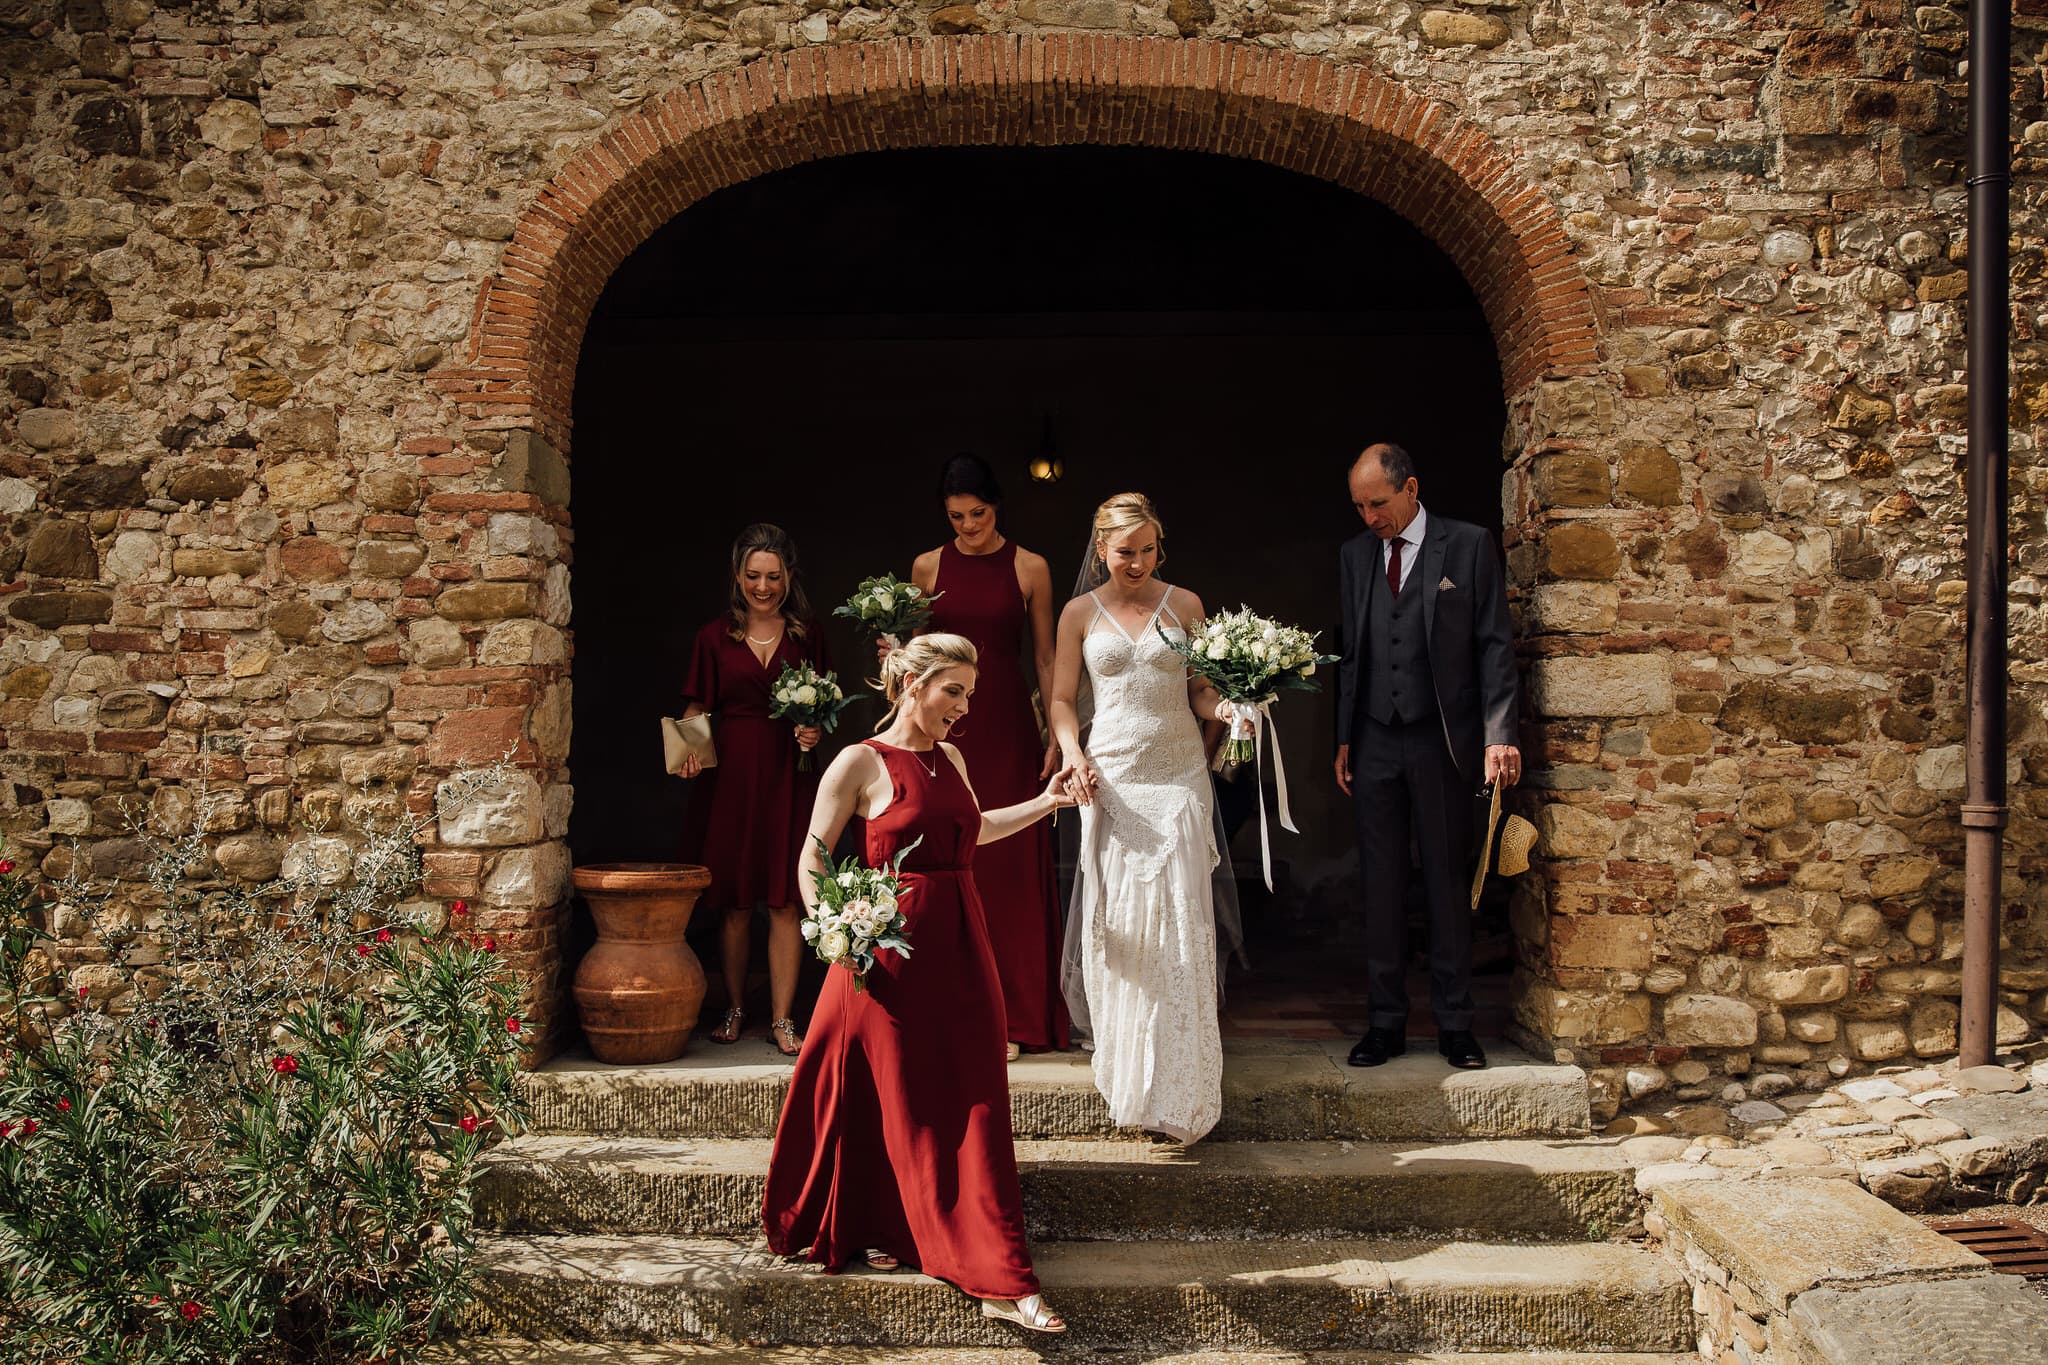 Bride and Bridesmaids in archway of Castello at wedding in Tuscany